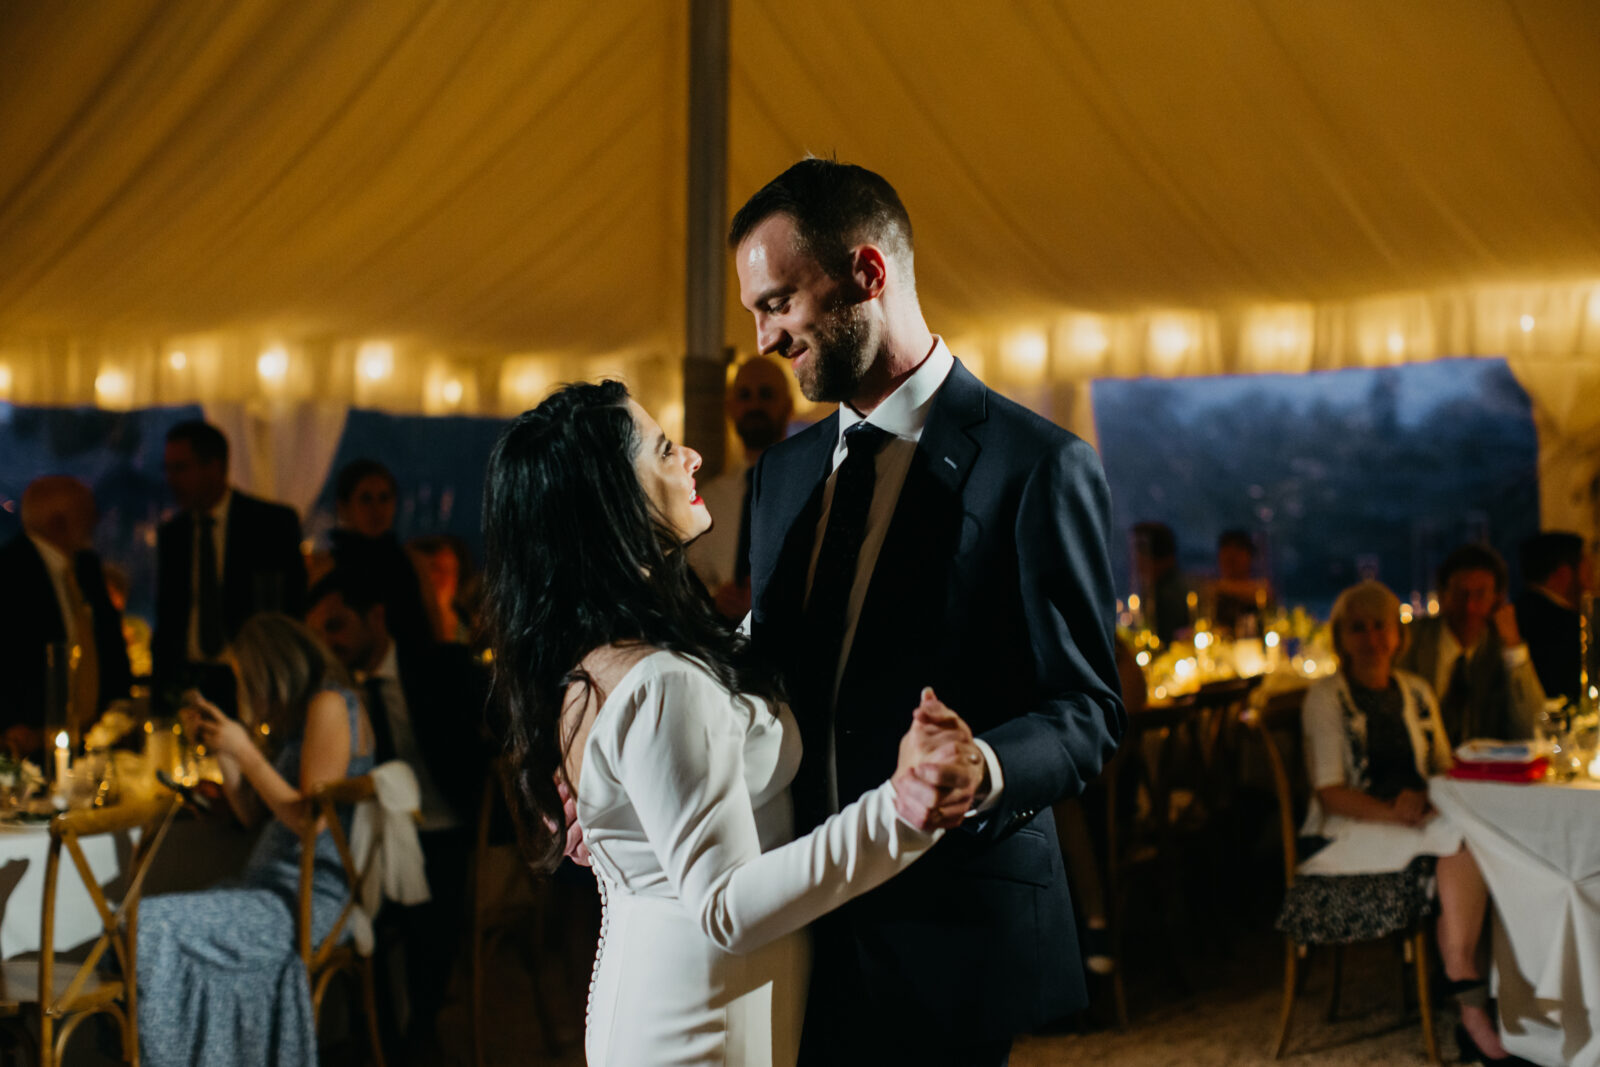 A lovely photo of the bride and groom  during their first dance as a married couple